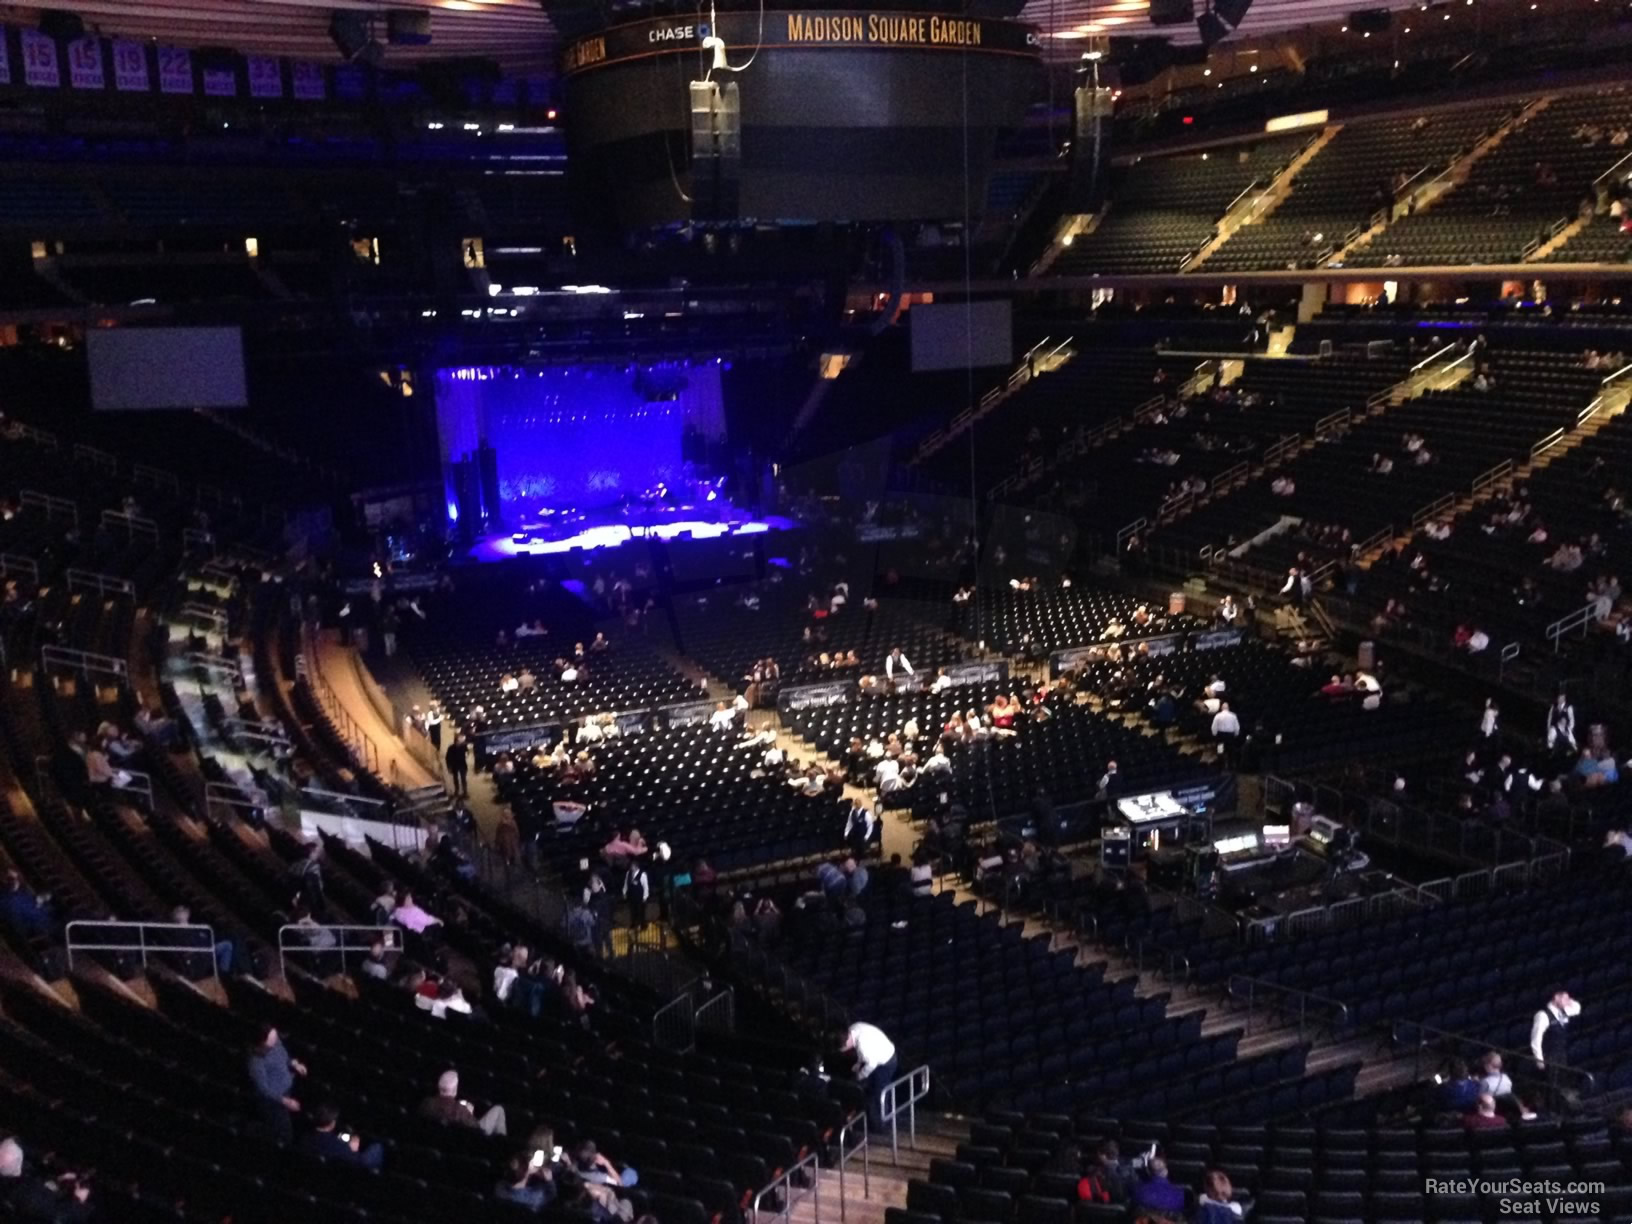 section 202, row 2 seat view  for concert - madison square garden